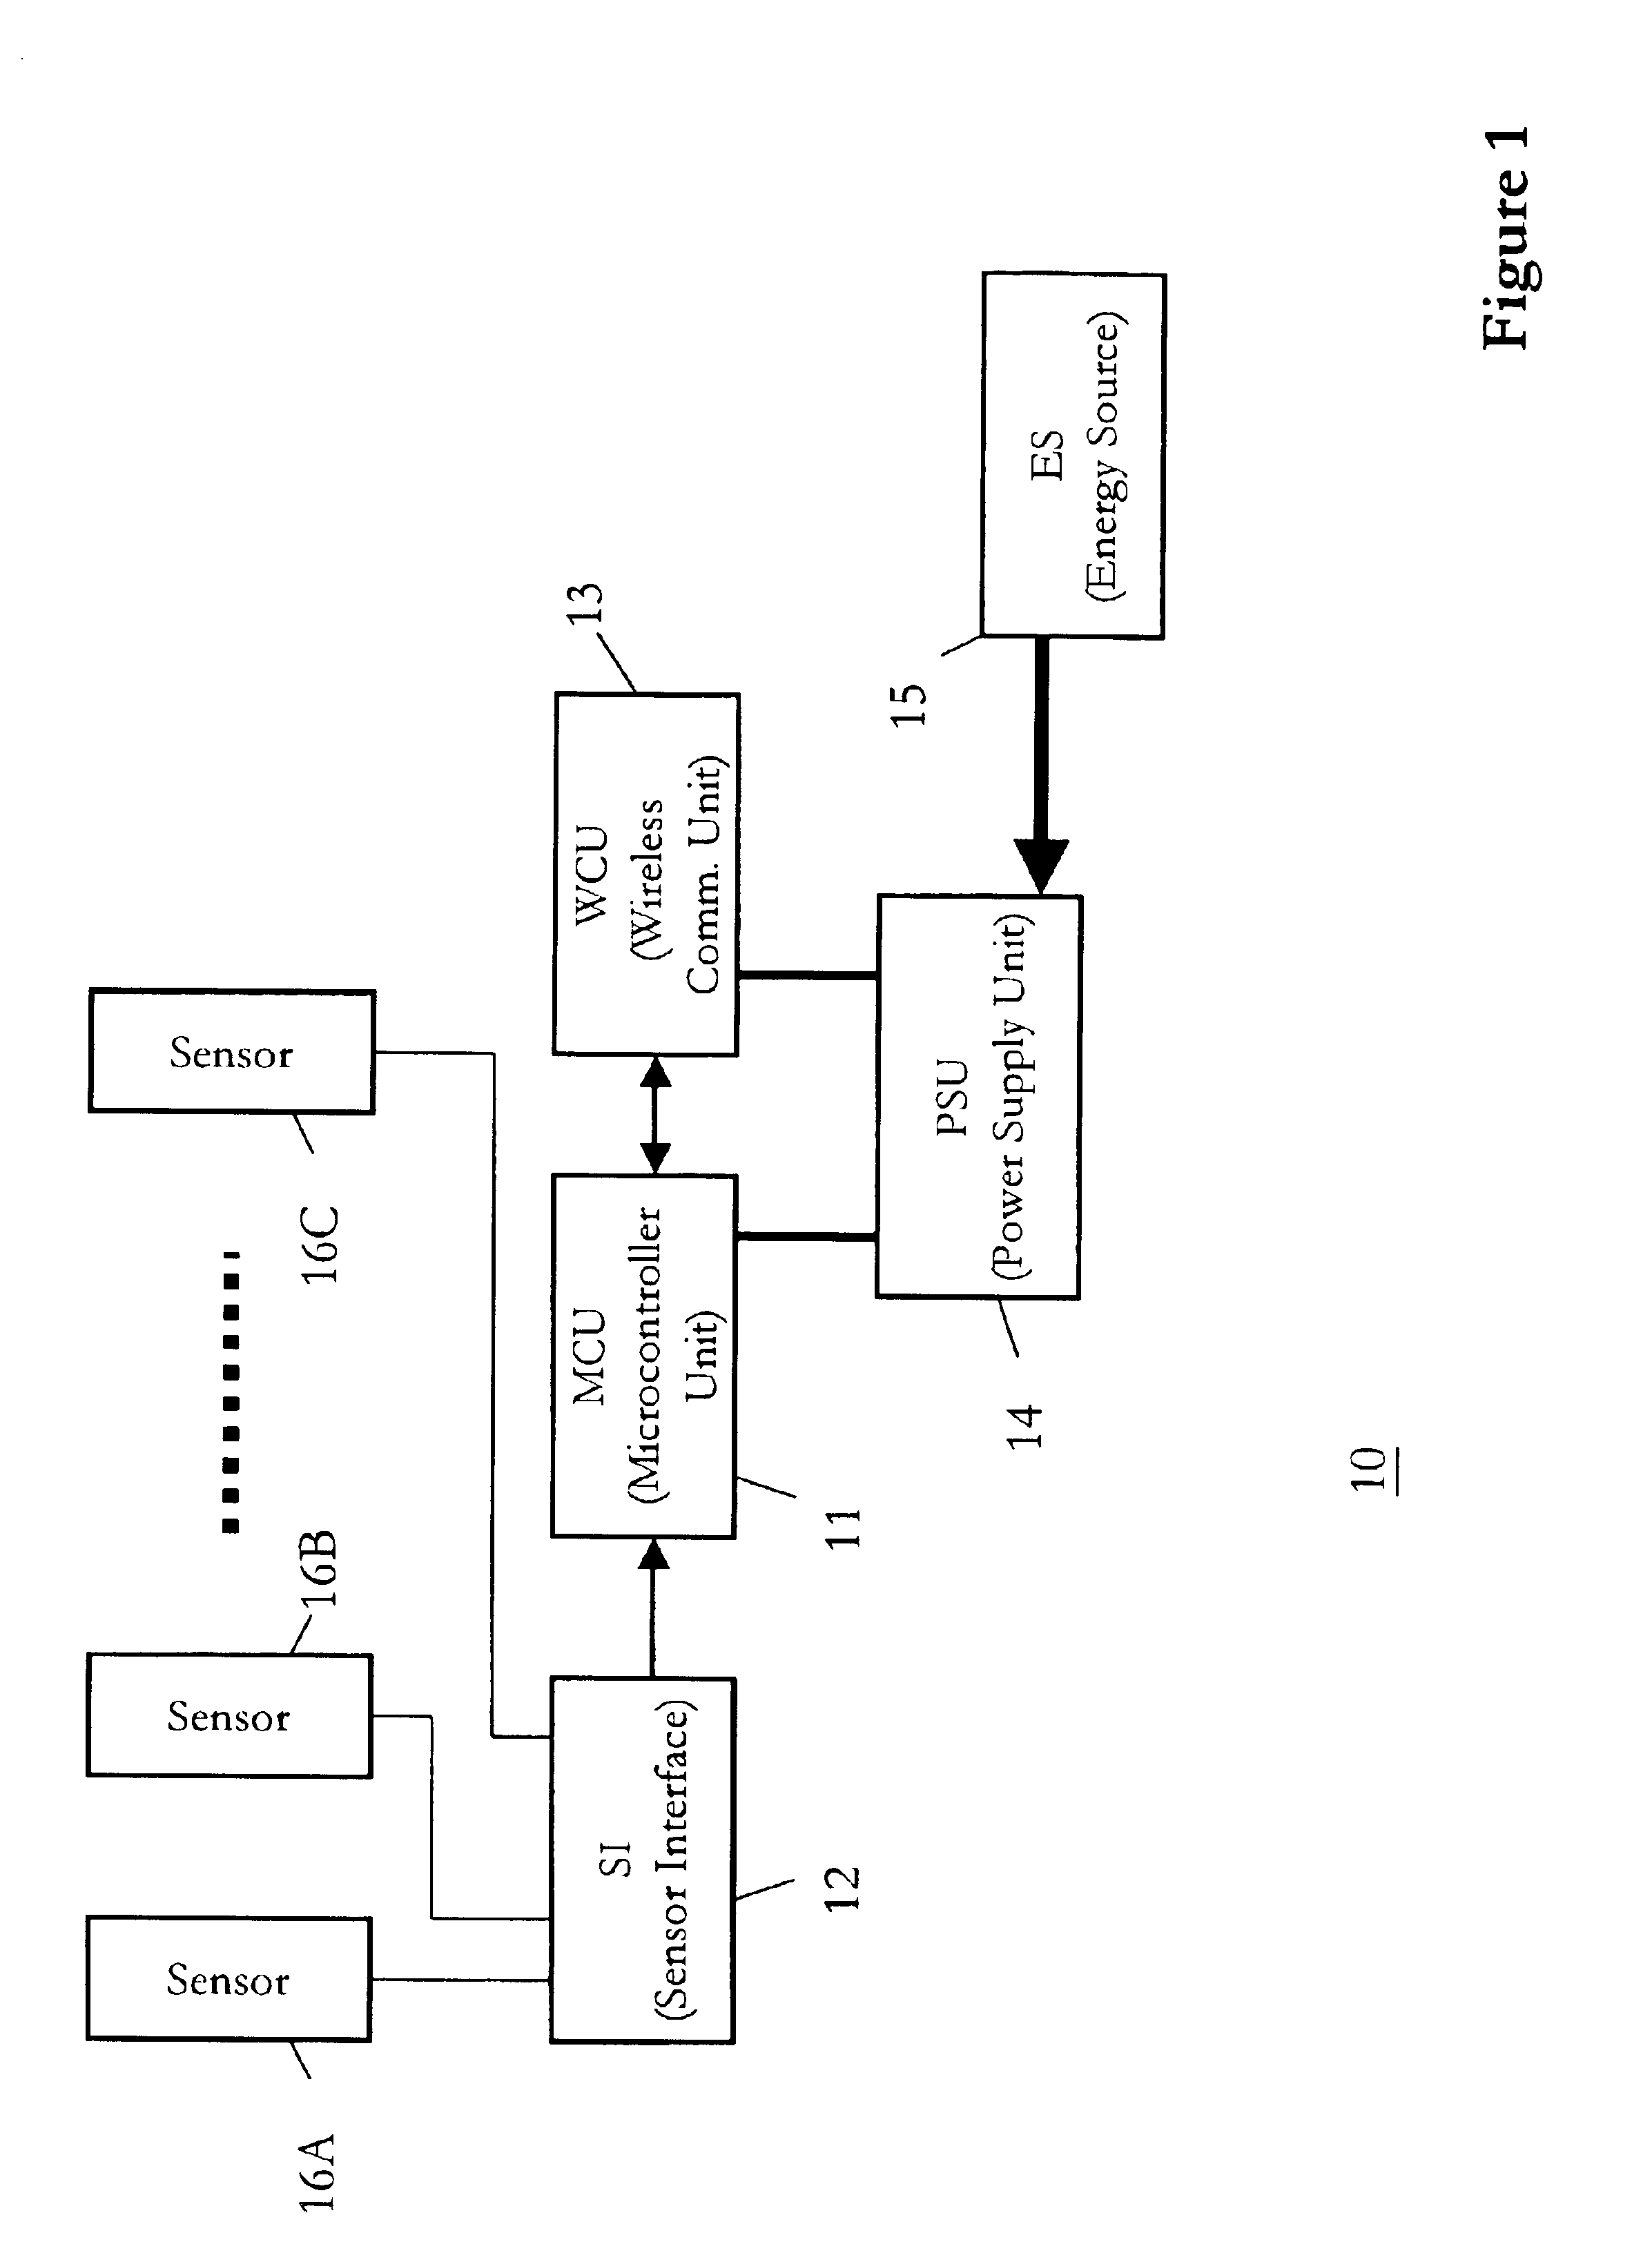 Alert system and method for geographic or natural disasters utilizing a telecommunications network